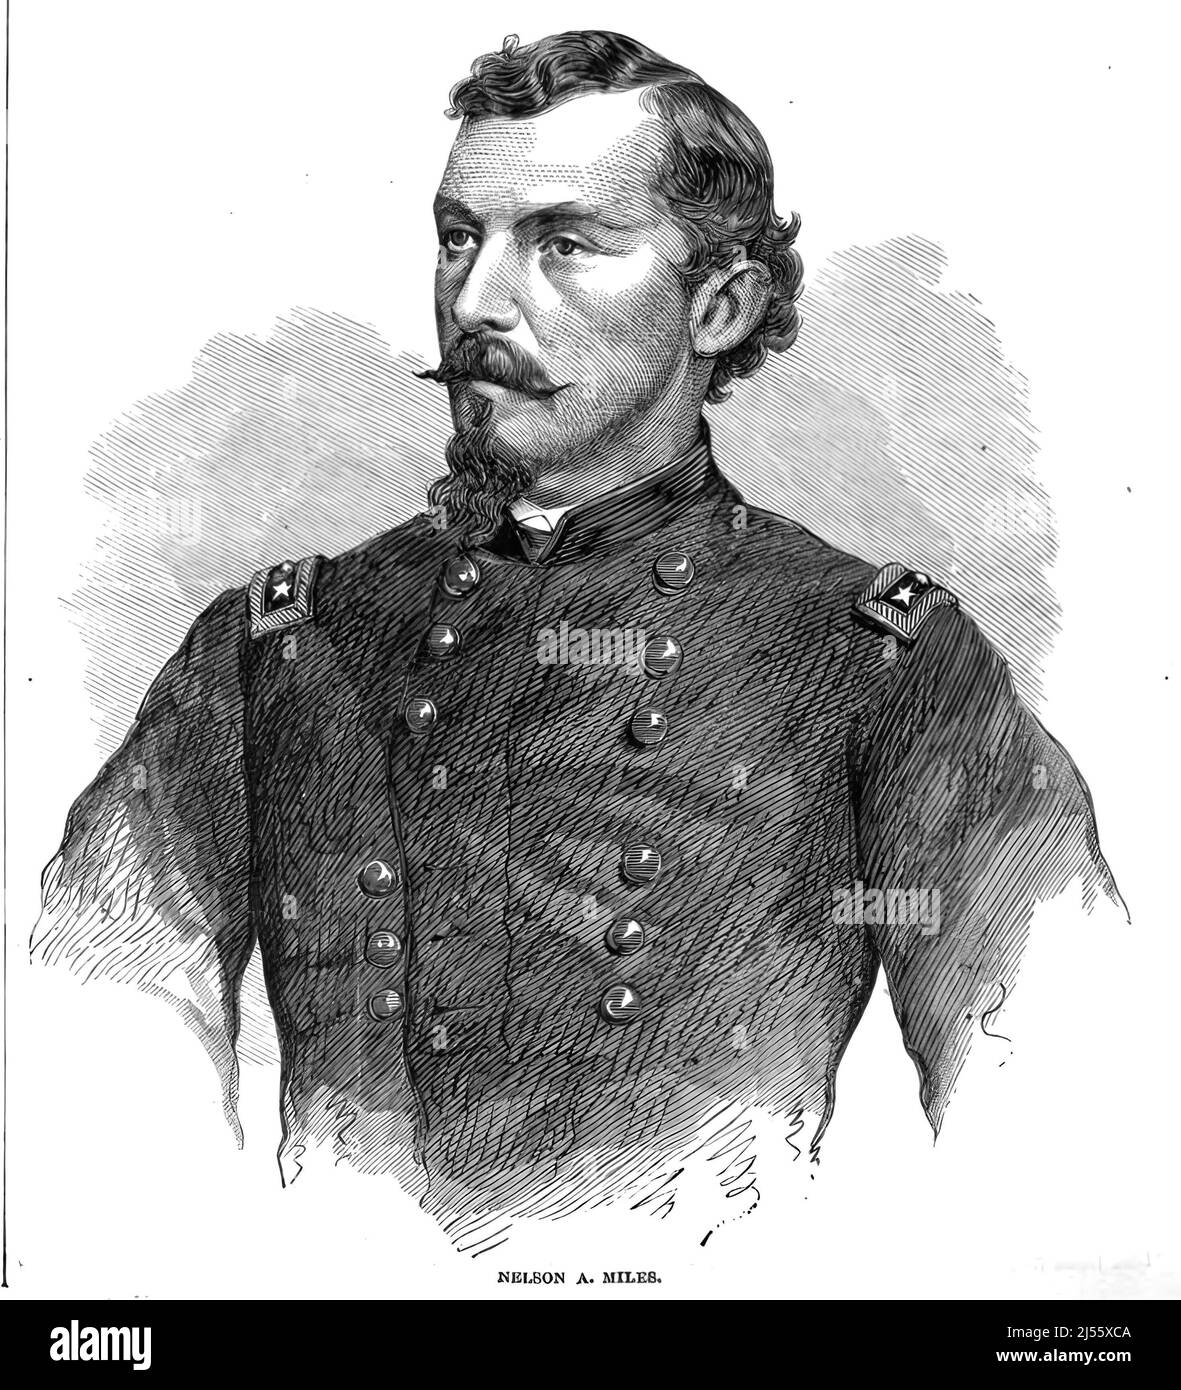 Portrait of Nelson Appleton Miles, Union Army General in the American Civil War. 19th century illustration Stock Photo